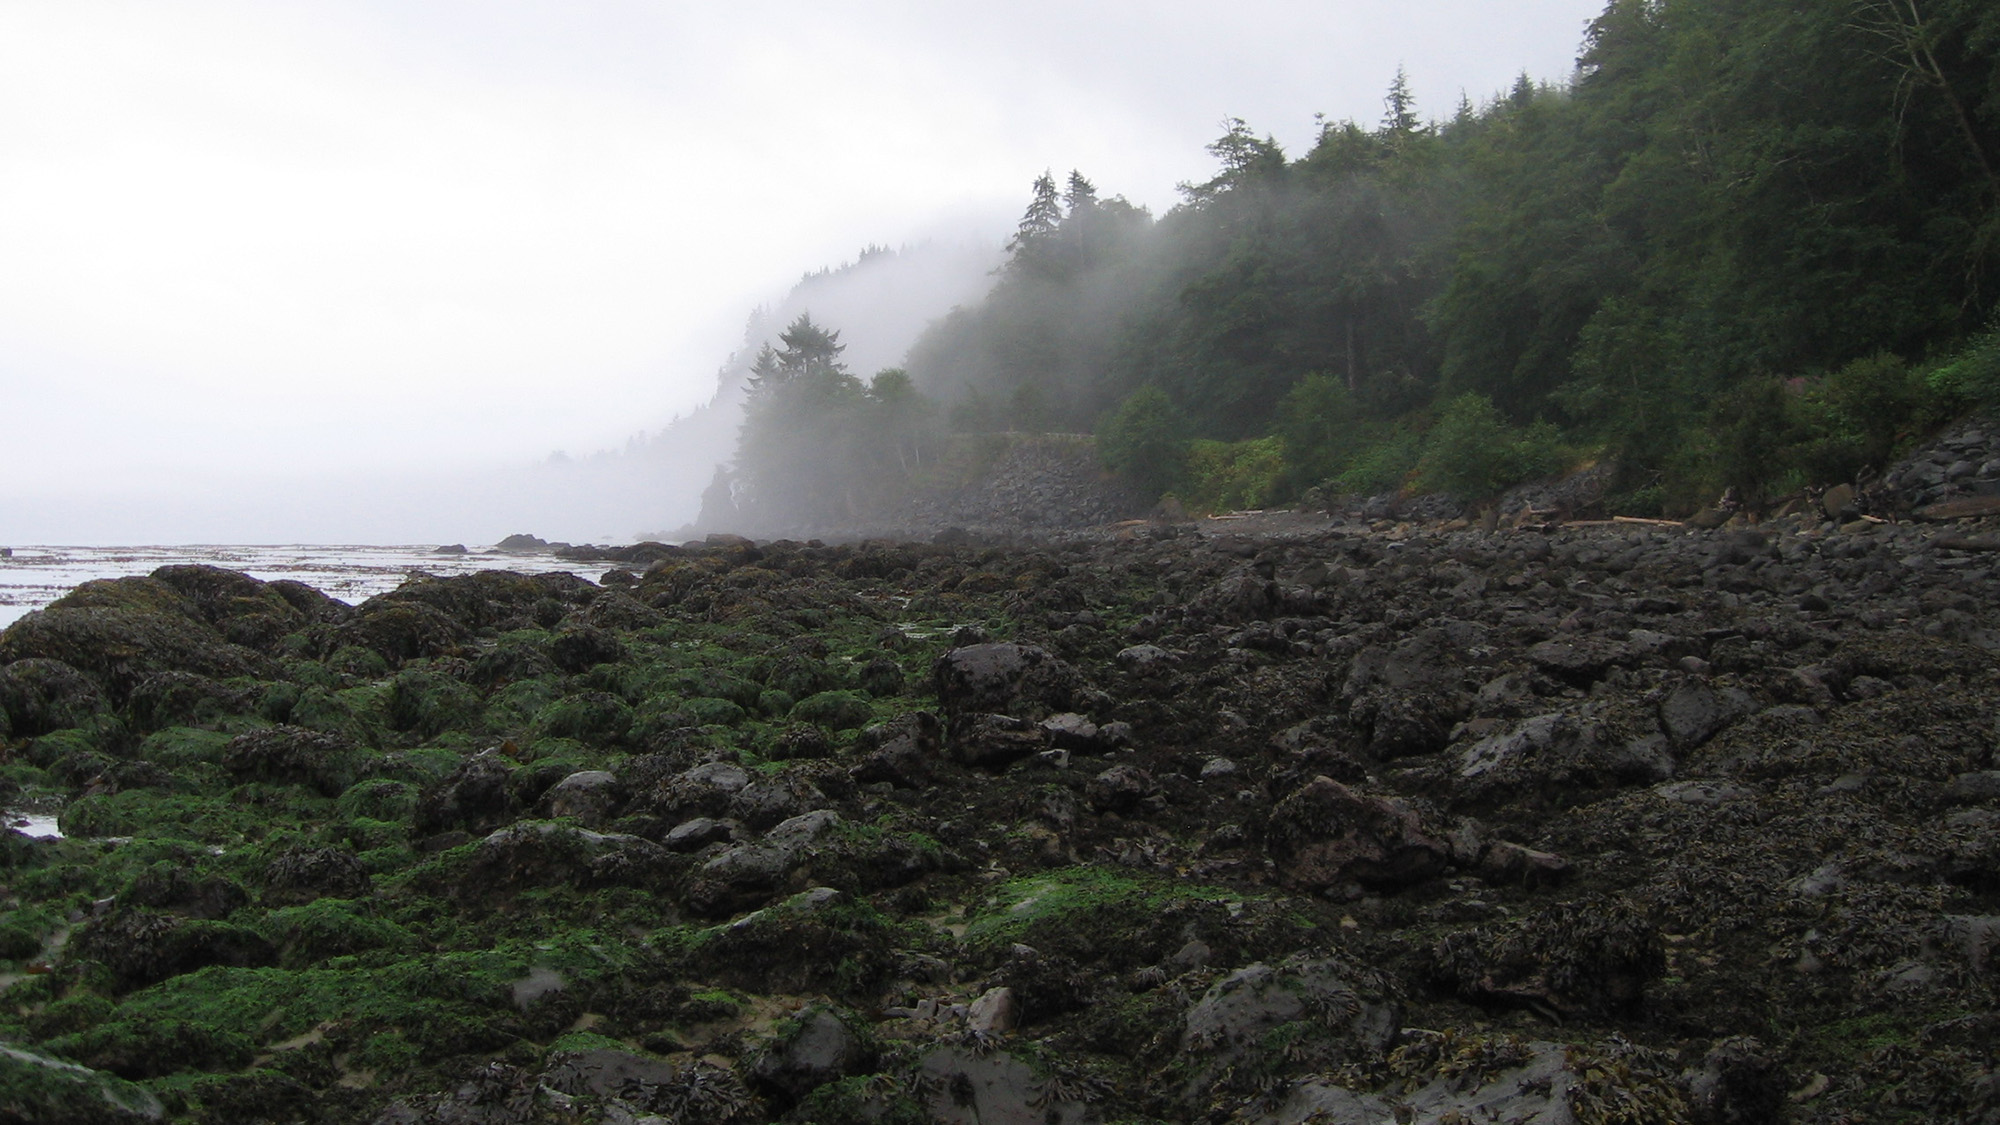 fog in green trees along beach with algae-covered rocks in foreground